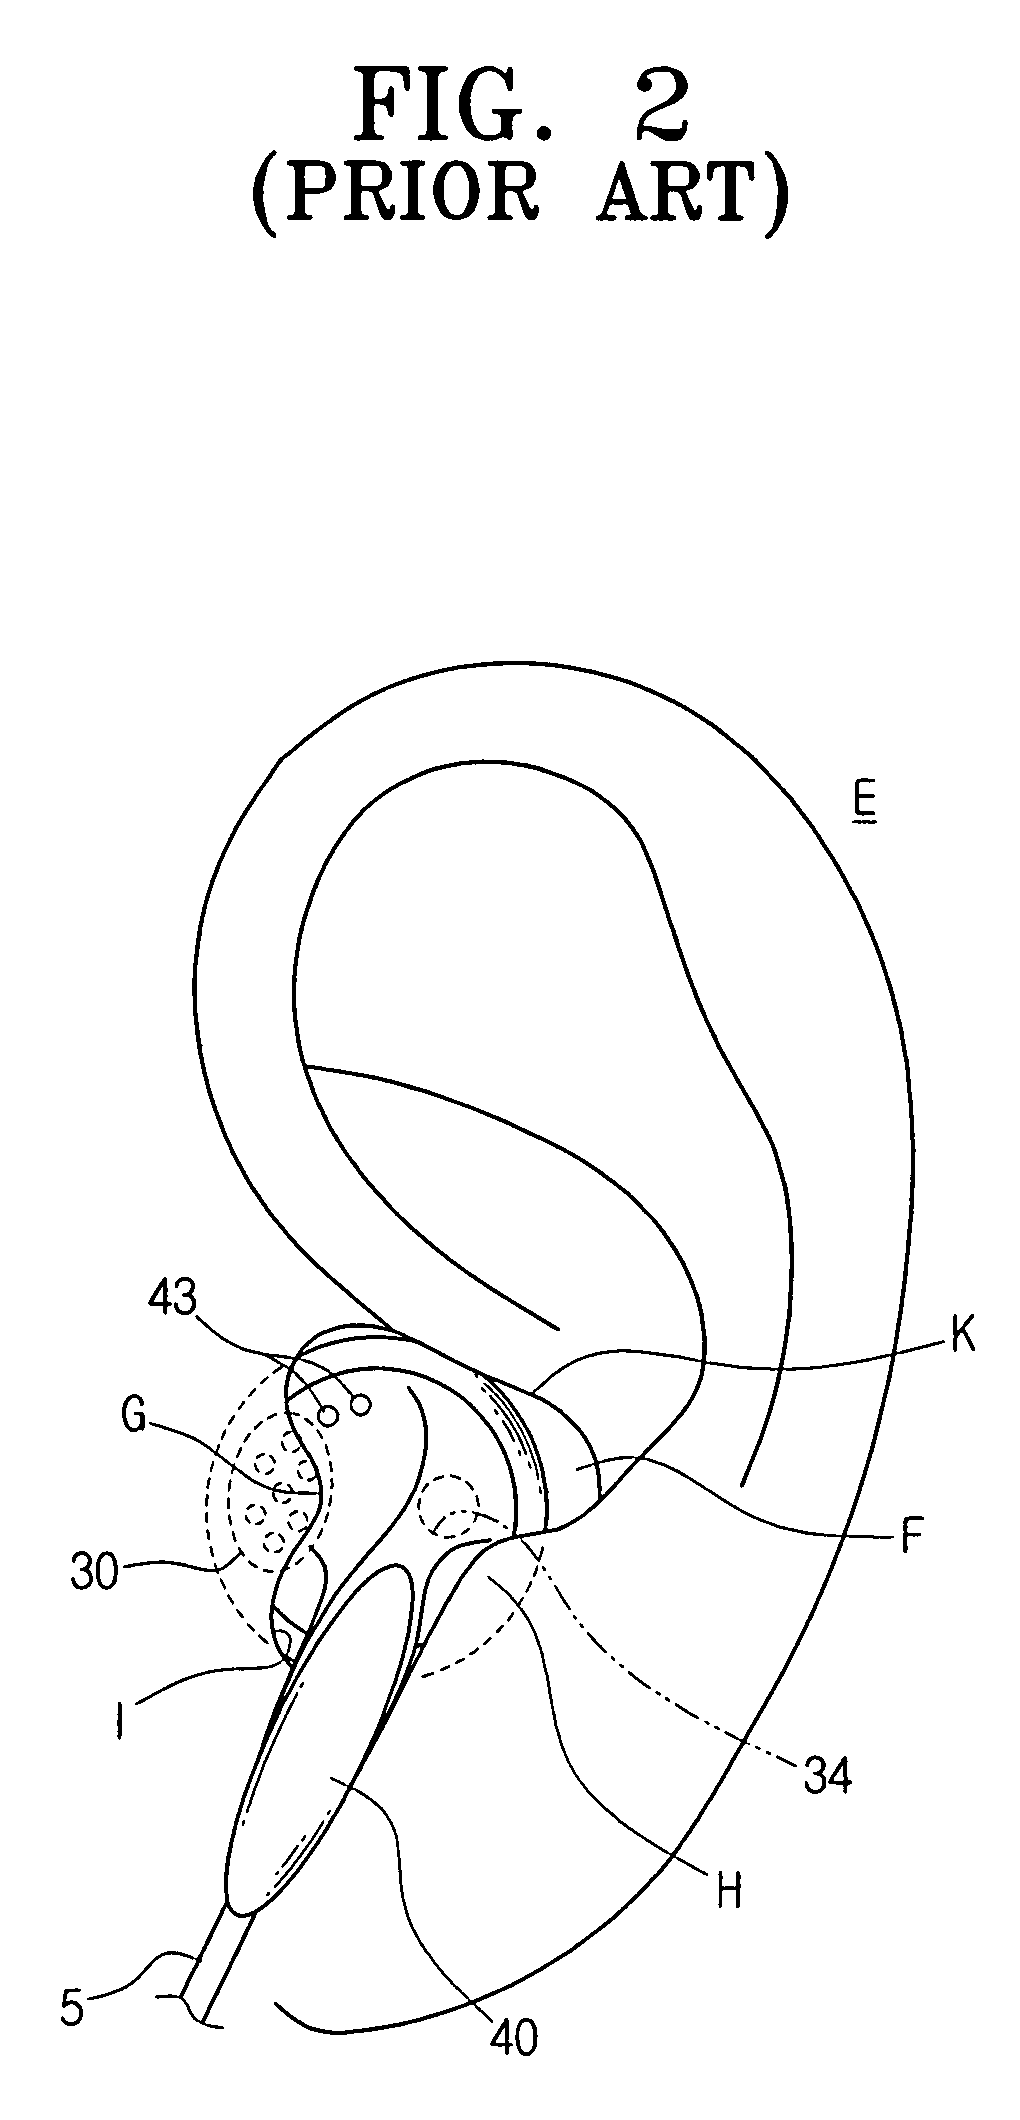 Earphone for placement in an ear